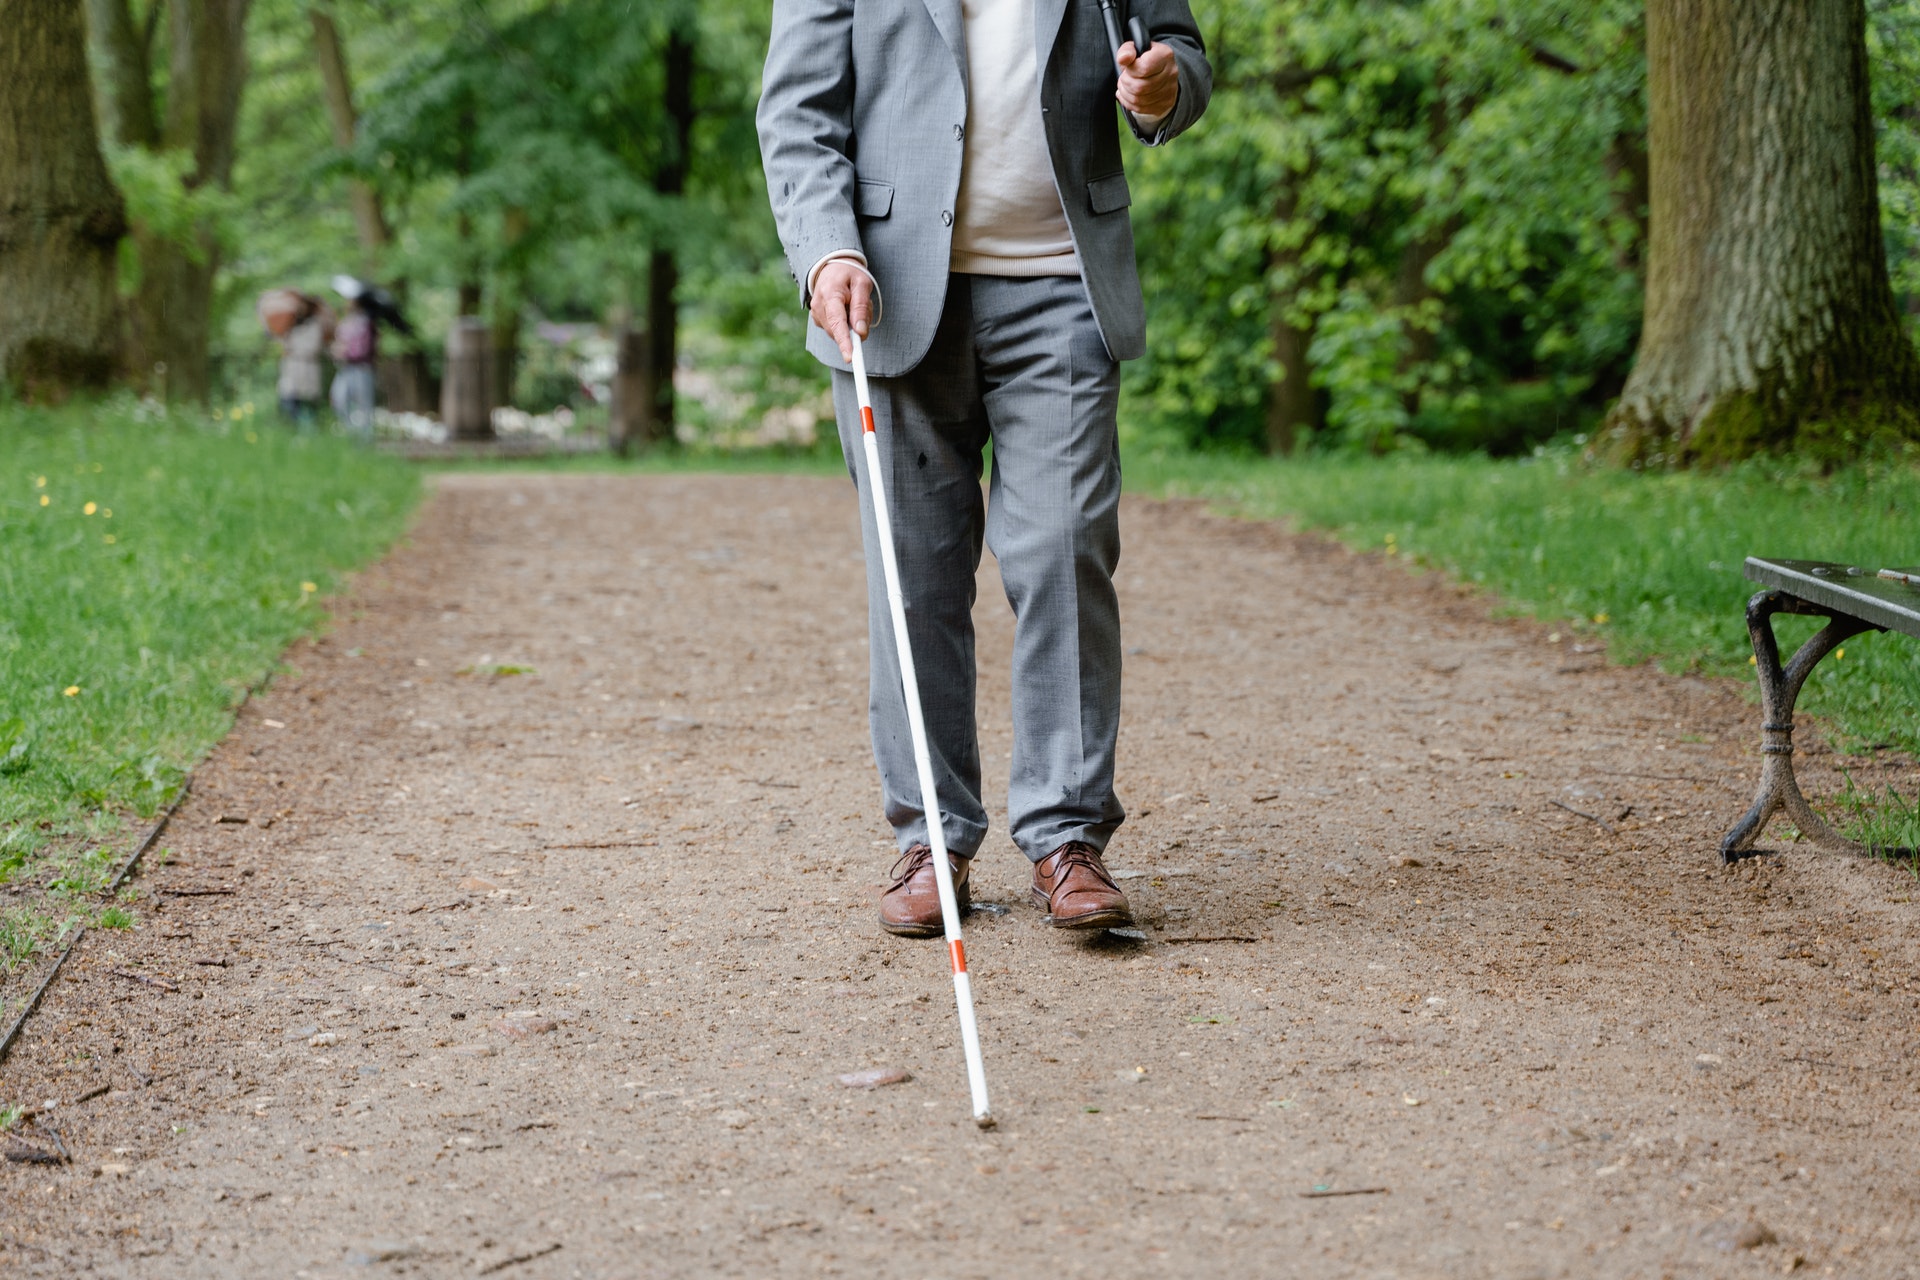 A blind man with white mobility cane, walking down a paved trail in a park.